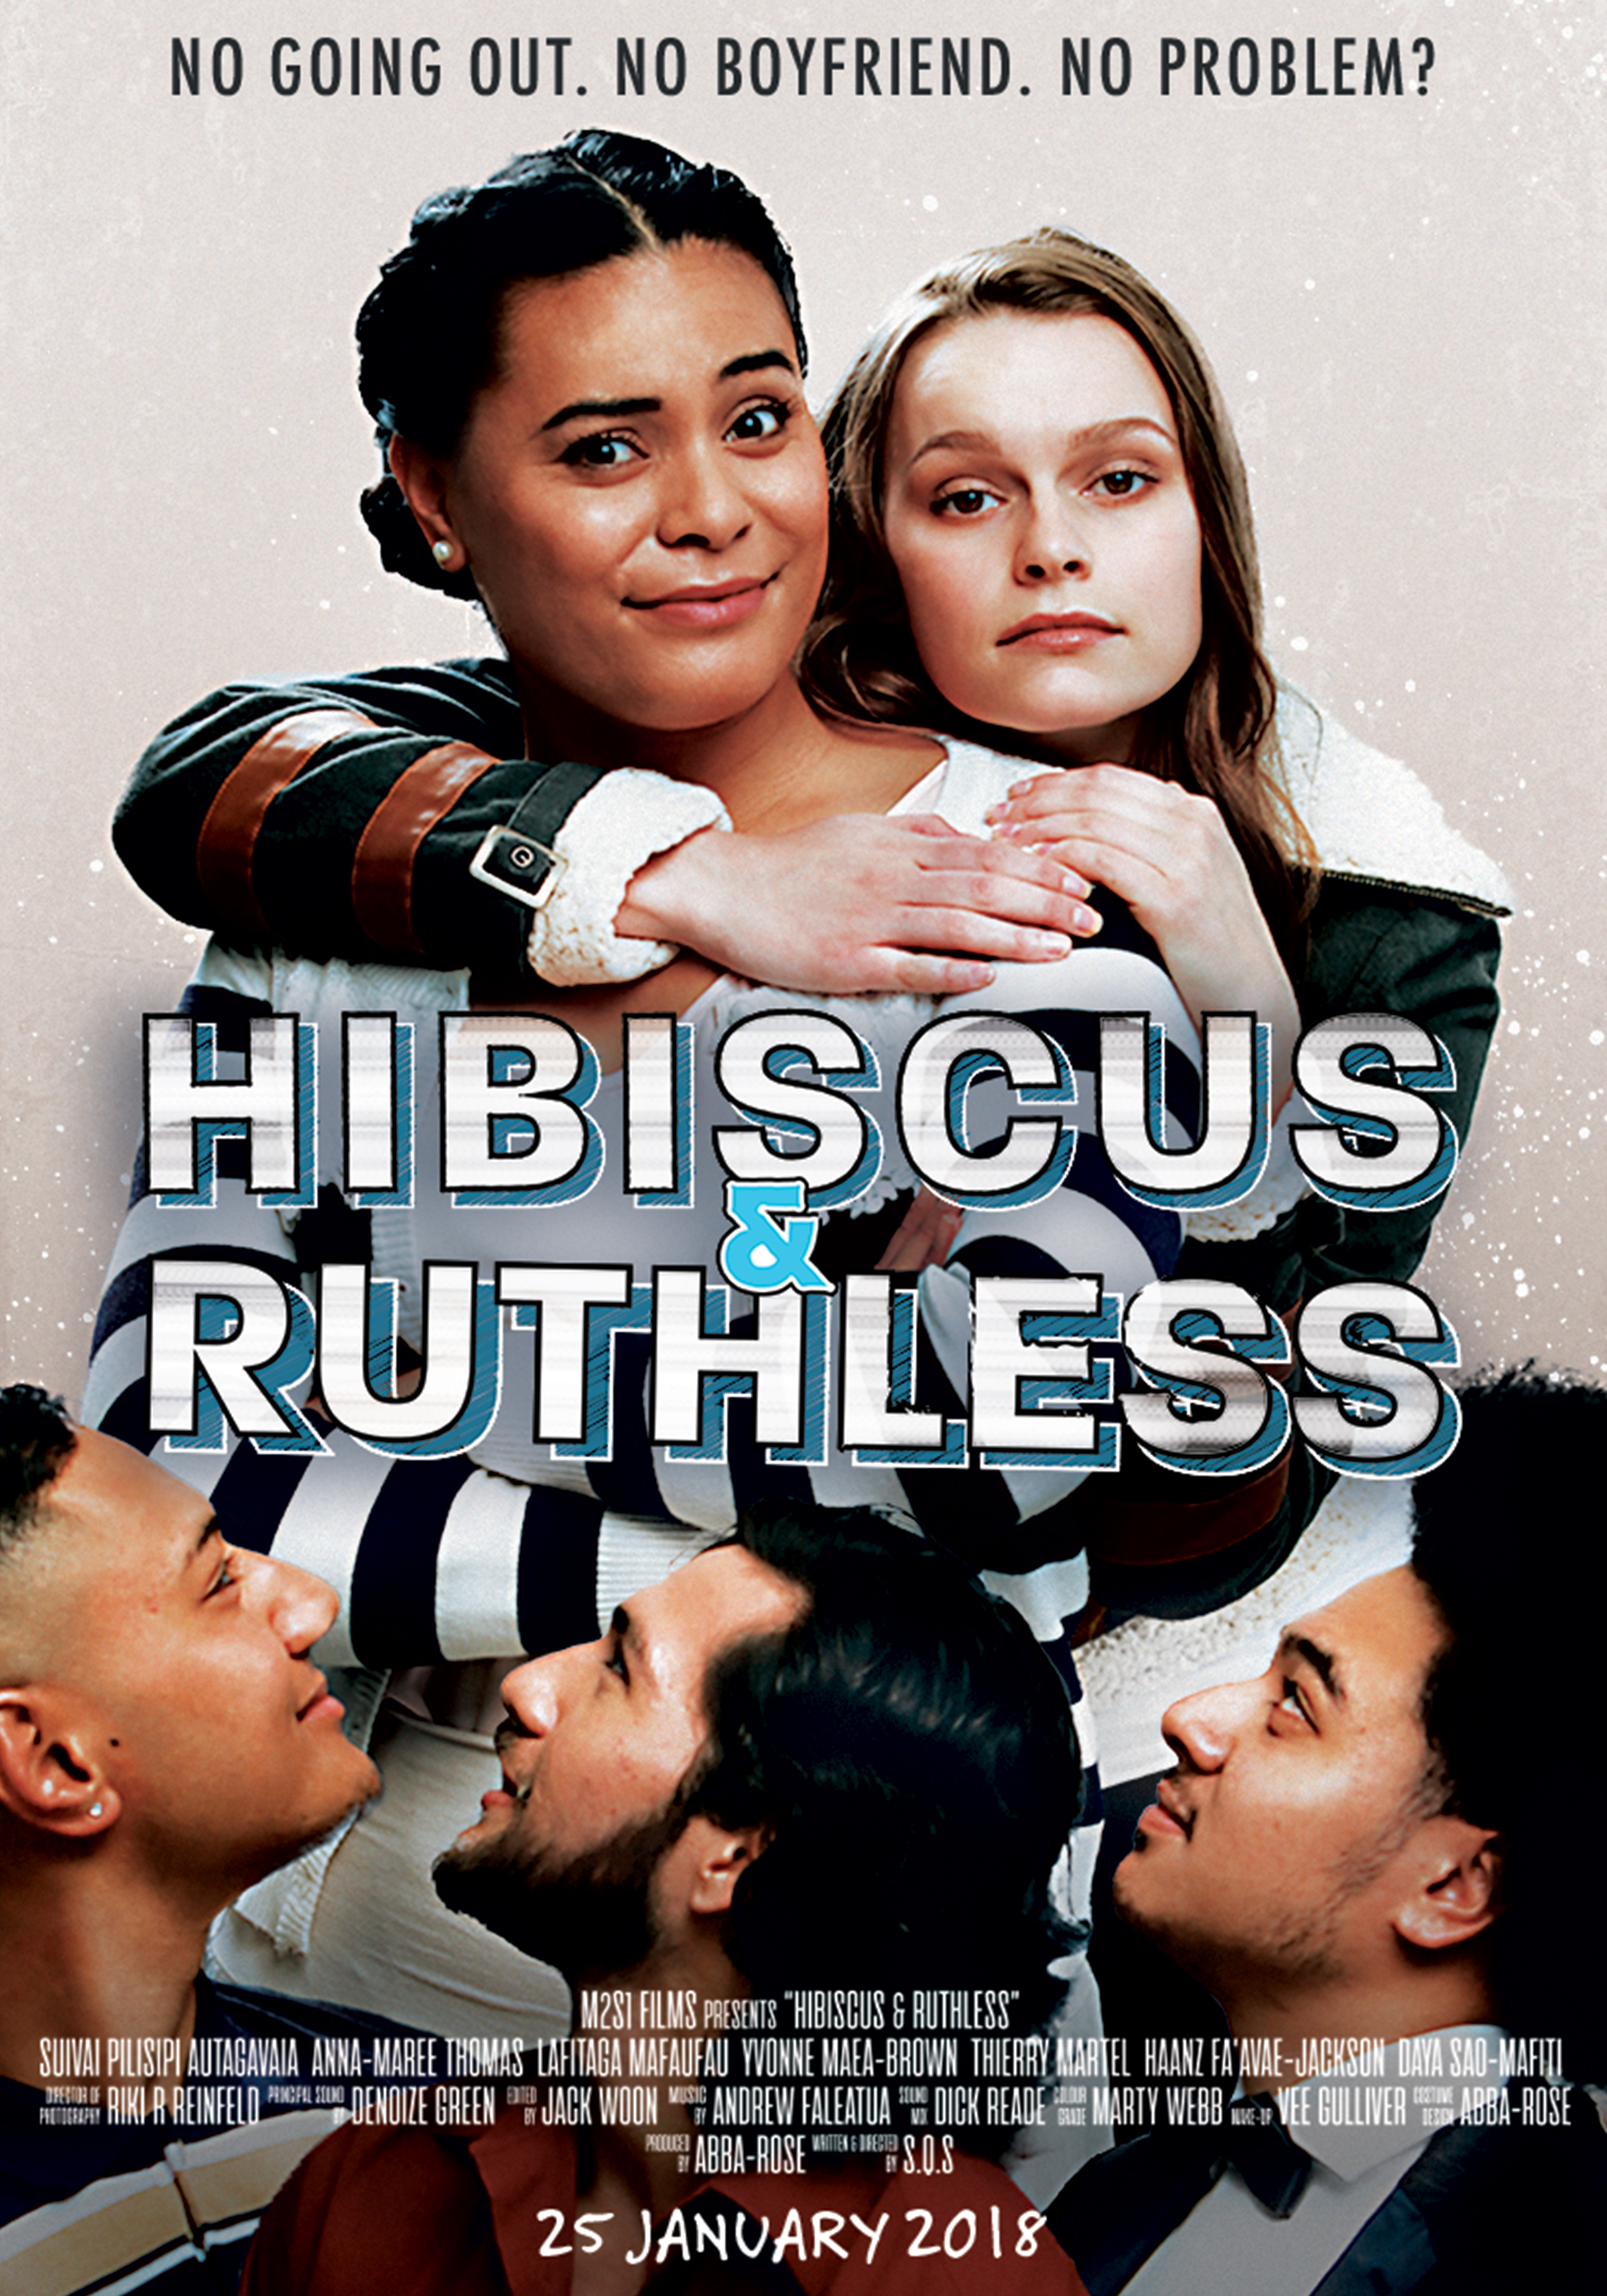 Hibiscus & Ruthless, a new film by NZ-born Samoan director Stallone Vaiaoga-Ioasa, is in cinemas next week. Photo / Supplied